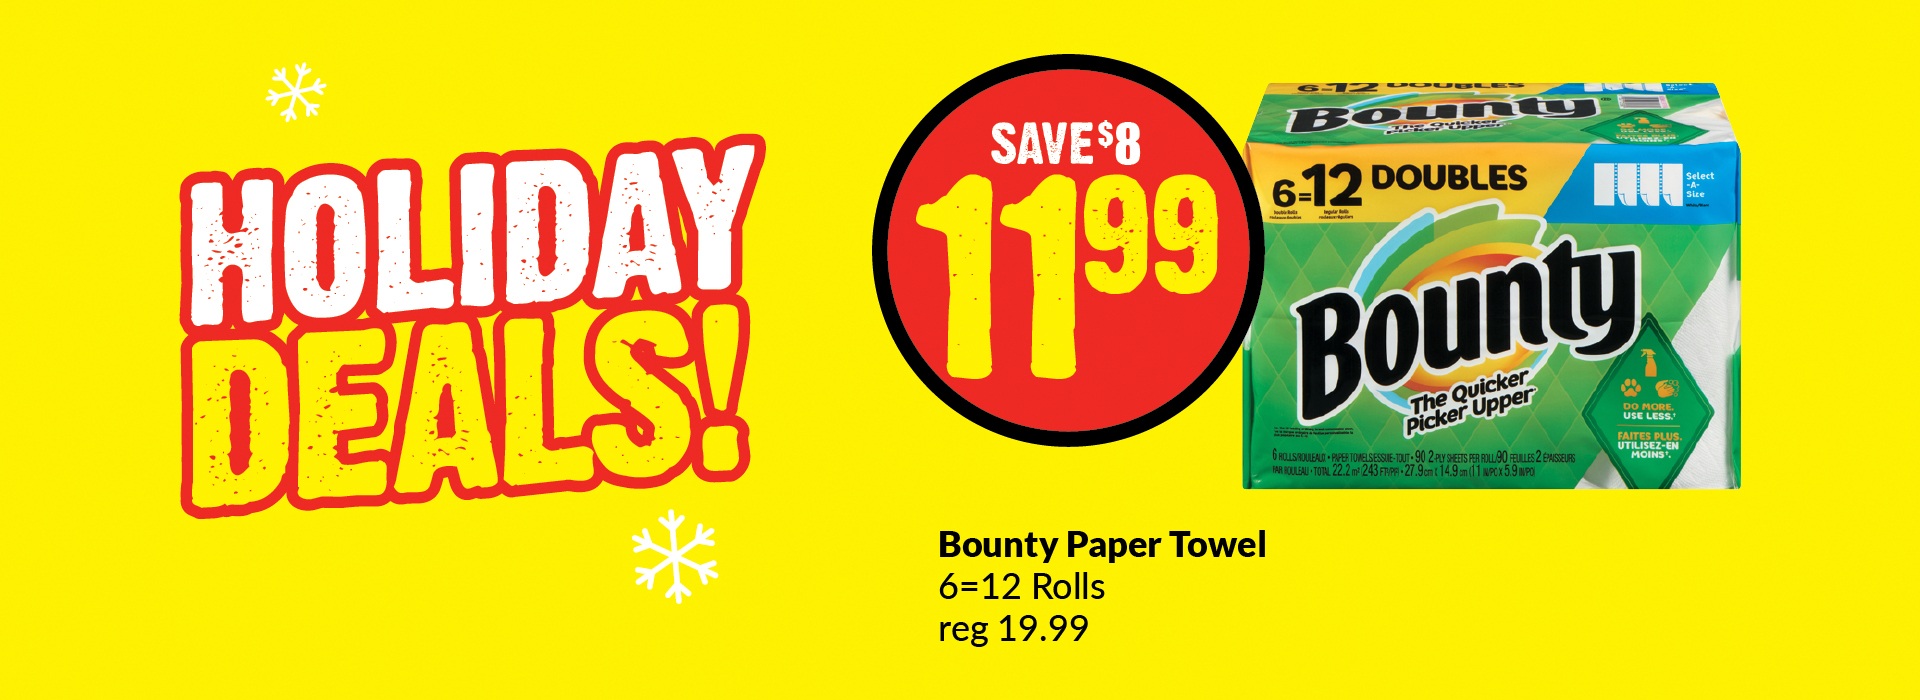 "The image consists of a pack of Bounty Paper Towel 6=12 Rolls reg 19.99 with text written on it, ""Holiday Deals, Save $11.99"". "